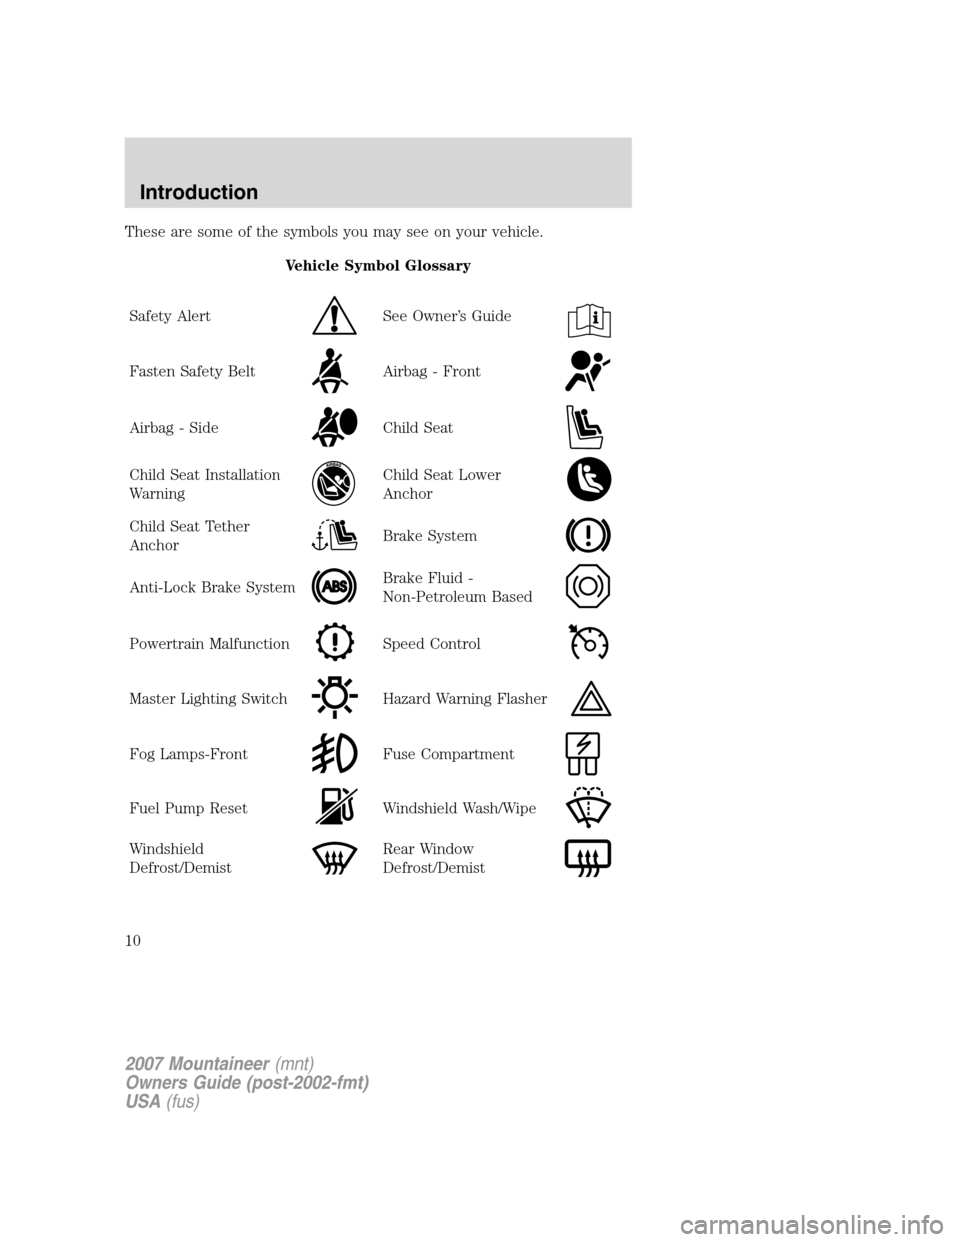 Mercury Mountaineer 2007  Owners Manuals These are some of the symbols you may see on your vehicle.
Vehicle Symbol Glossary
Safety Alert
See Owner’s Guide
Fasten Safety BeltAirbag - Front
Airbag - SideChild Seat
Child Seat Installation
War